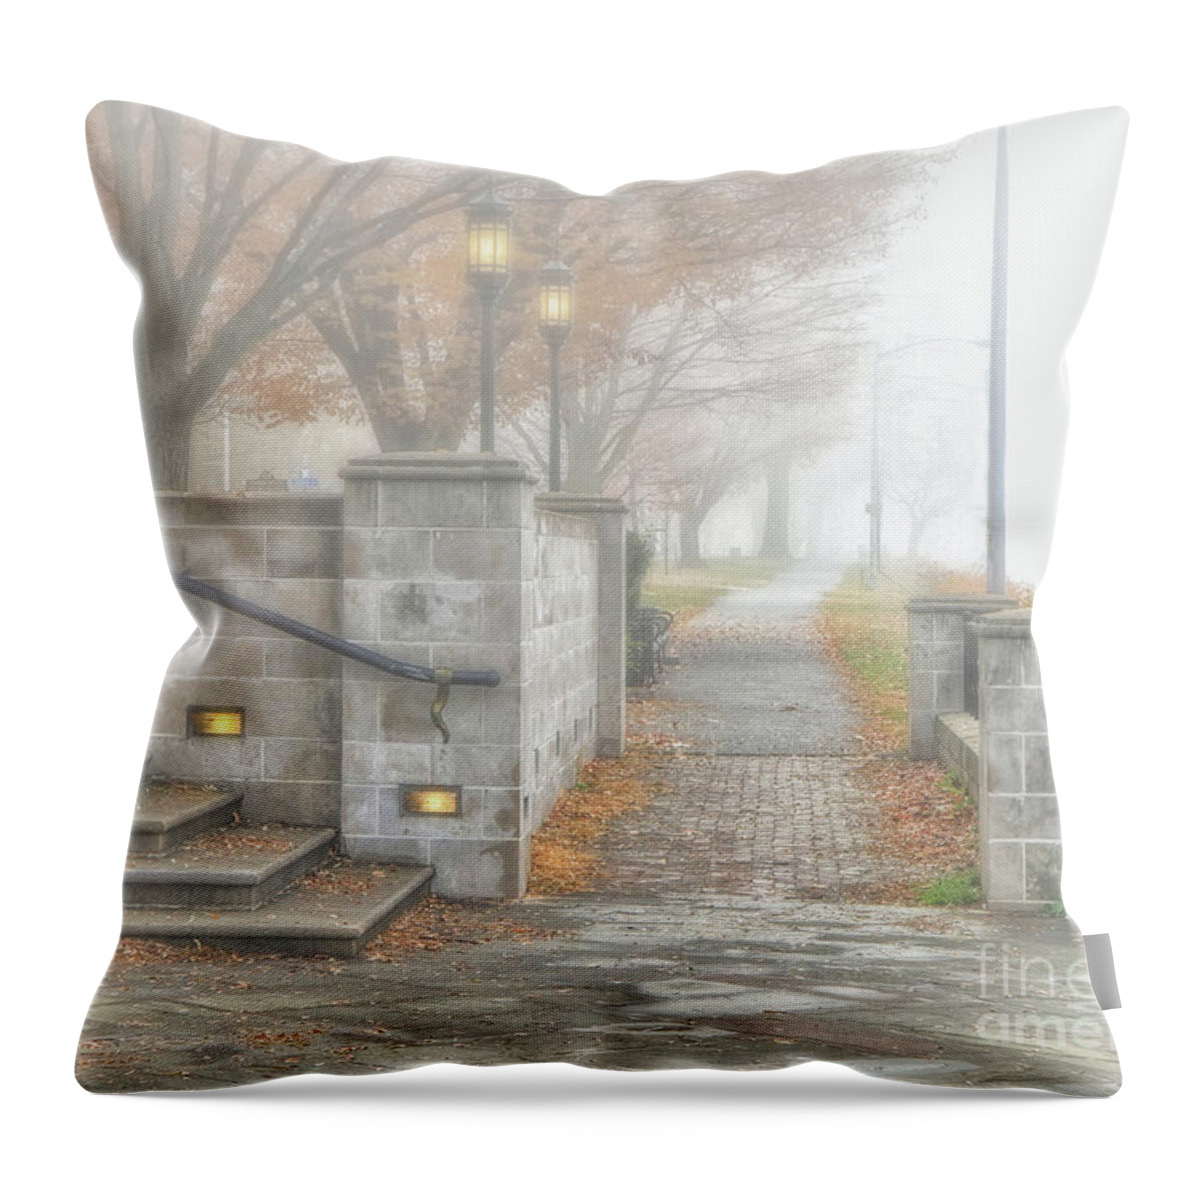 Fog Throw Pillow featuring the photograph Into The Fog by Geoff Crego